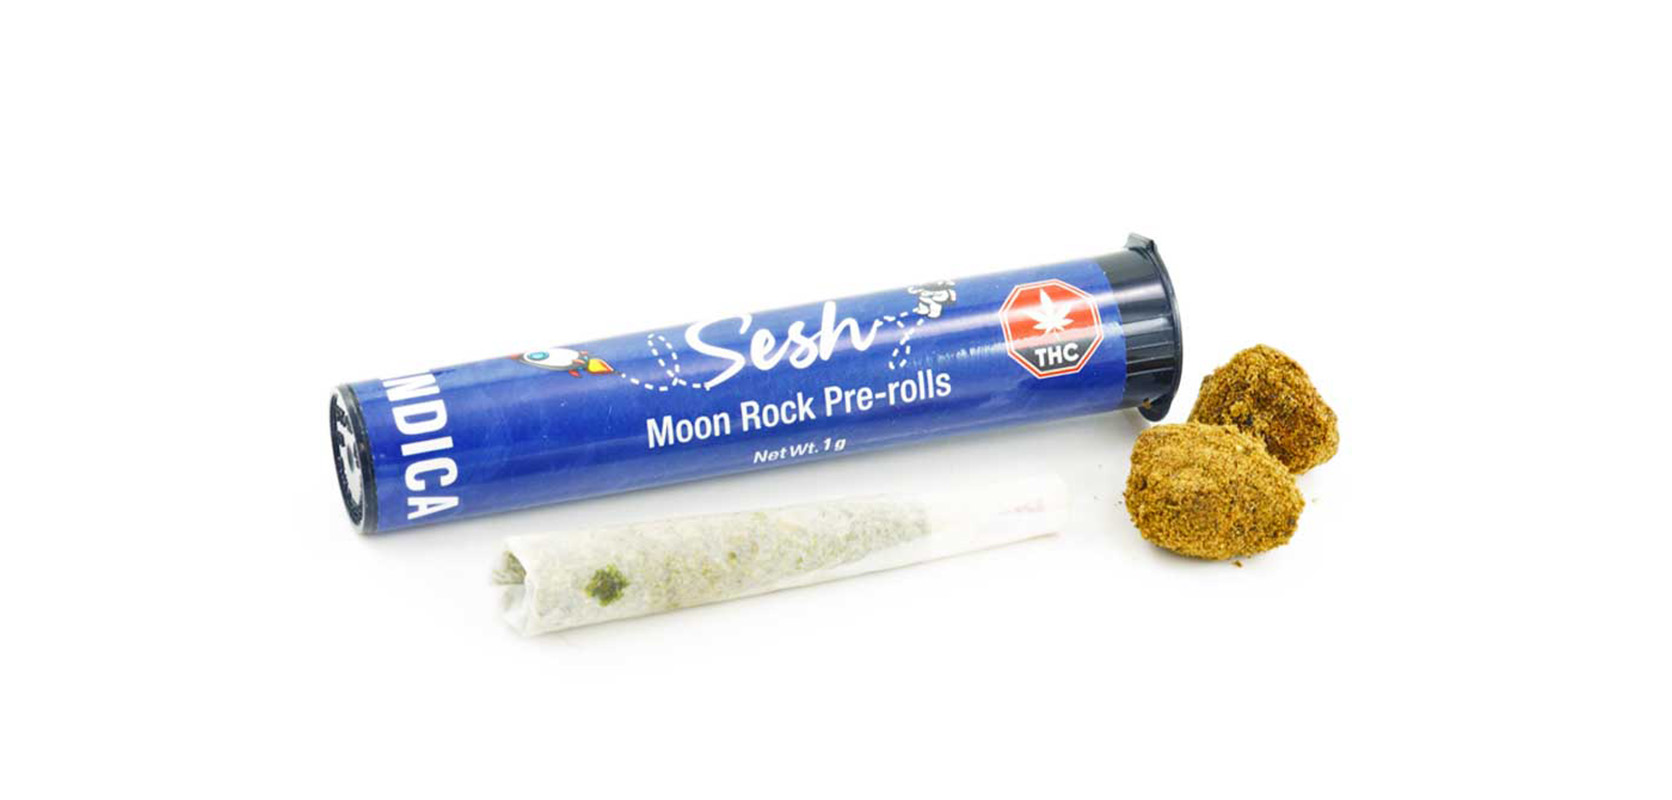 Sesh Moon Rock Joints at Low Price Bud online dispensary Vancouver to order weed online in Canada. Moon Rocks for sale. 